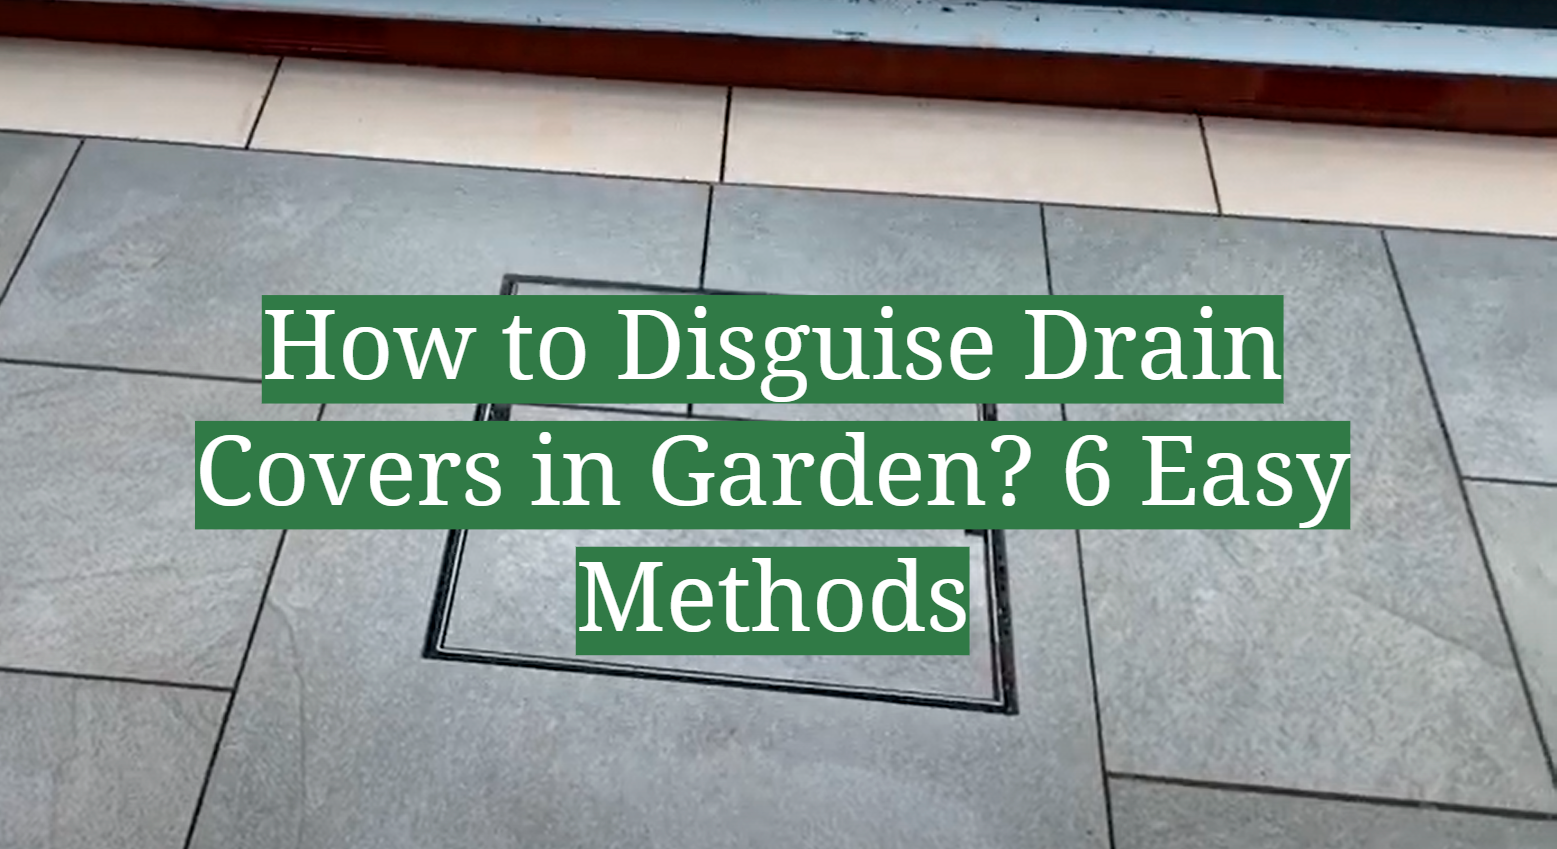 How to Disguise Drain Covers in Garden? 6 Easy Methods